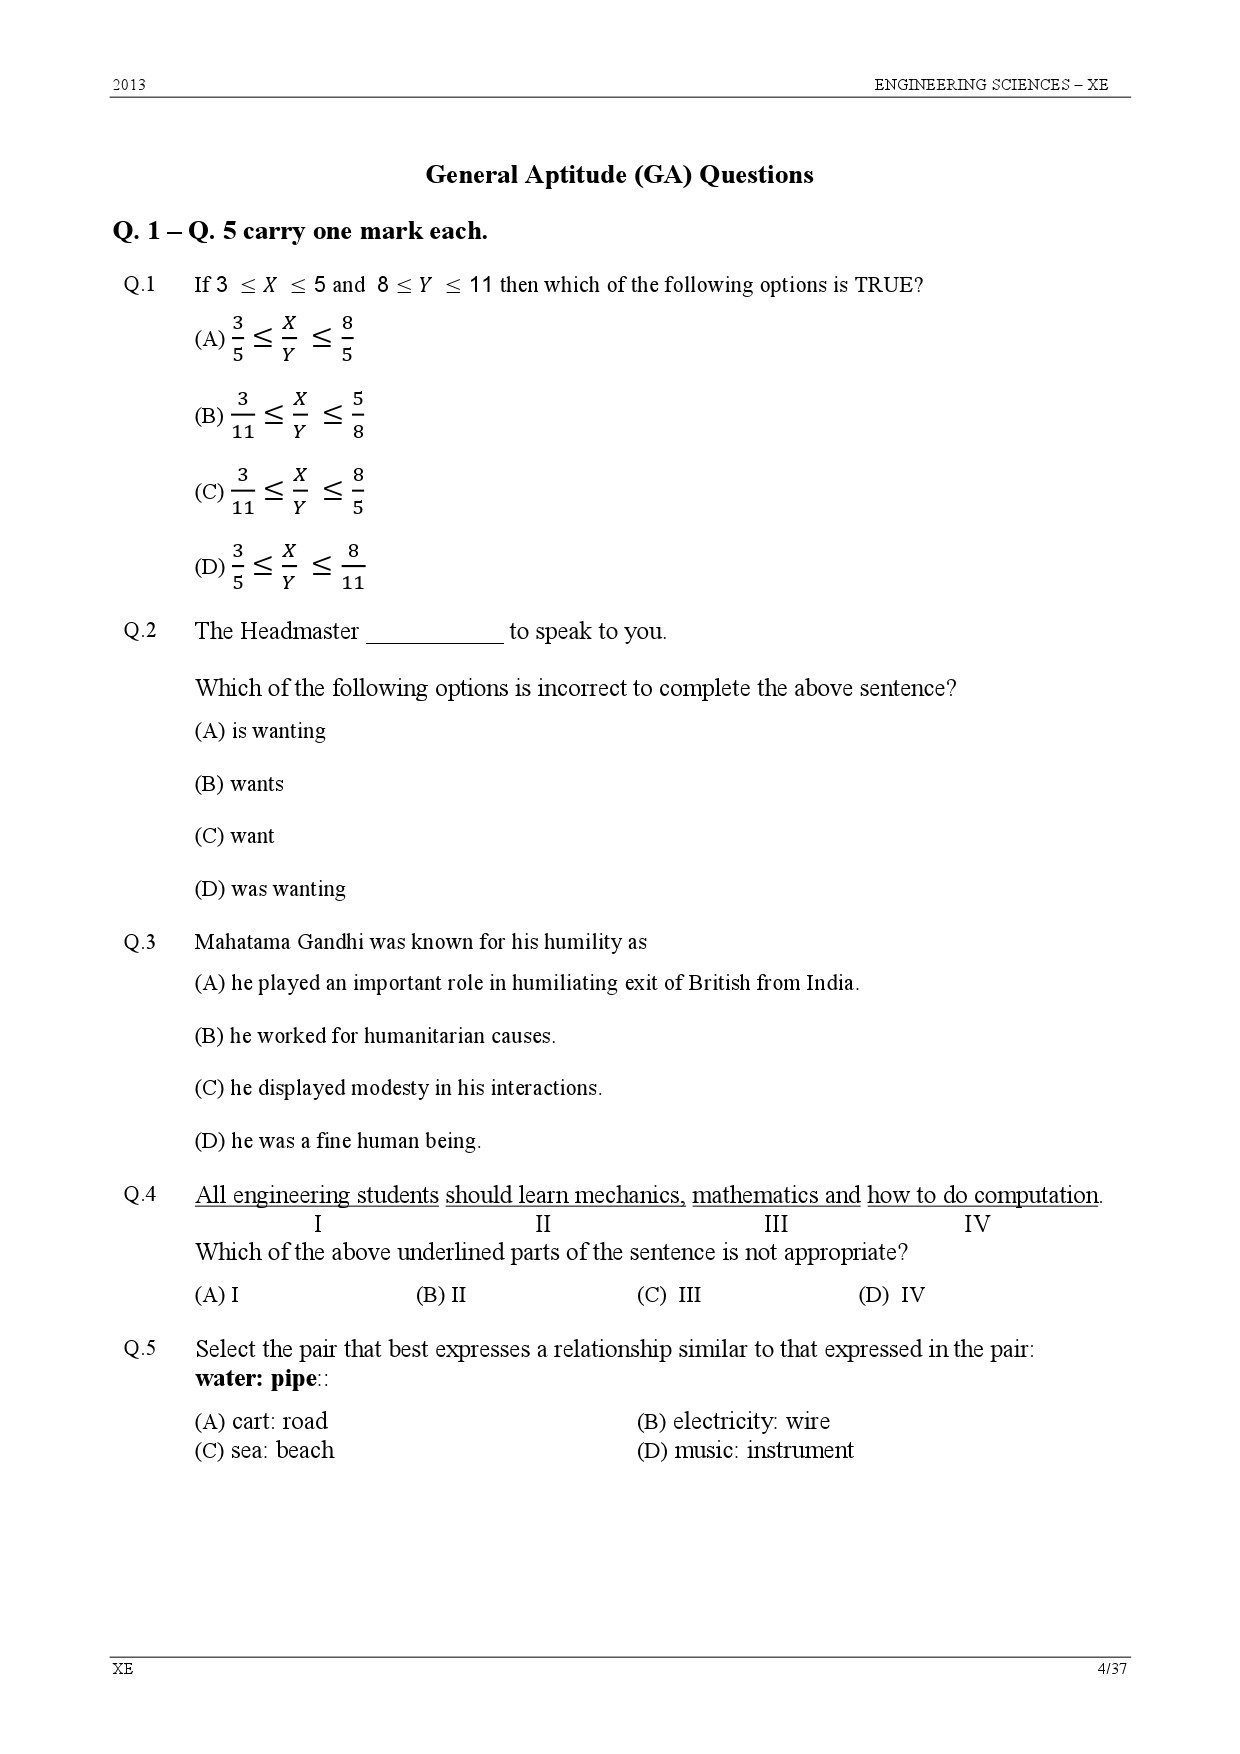 GATE Exam Question Paper 2013 Engineering Sciences 4